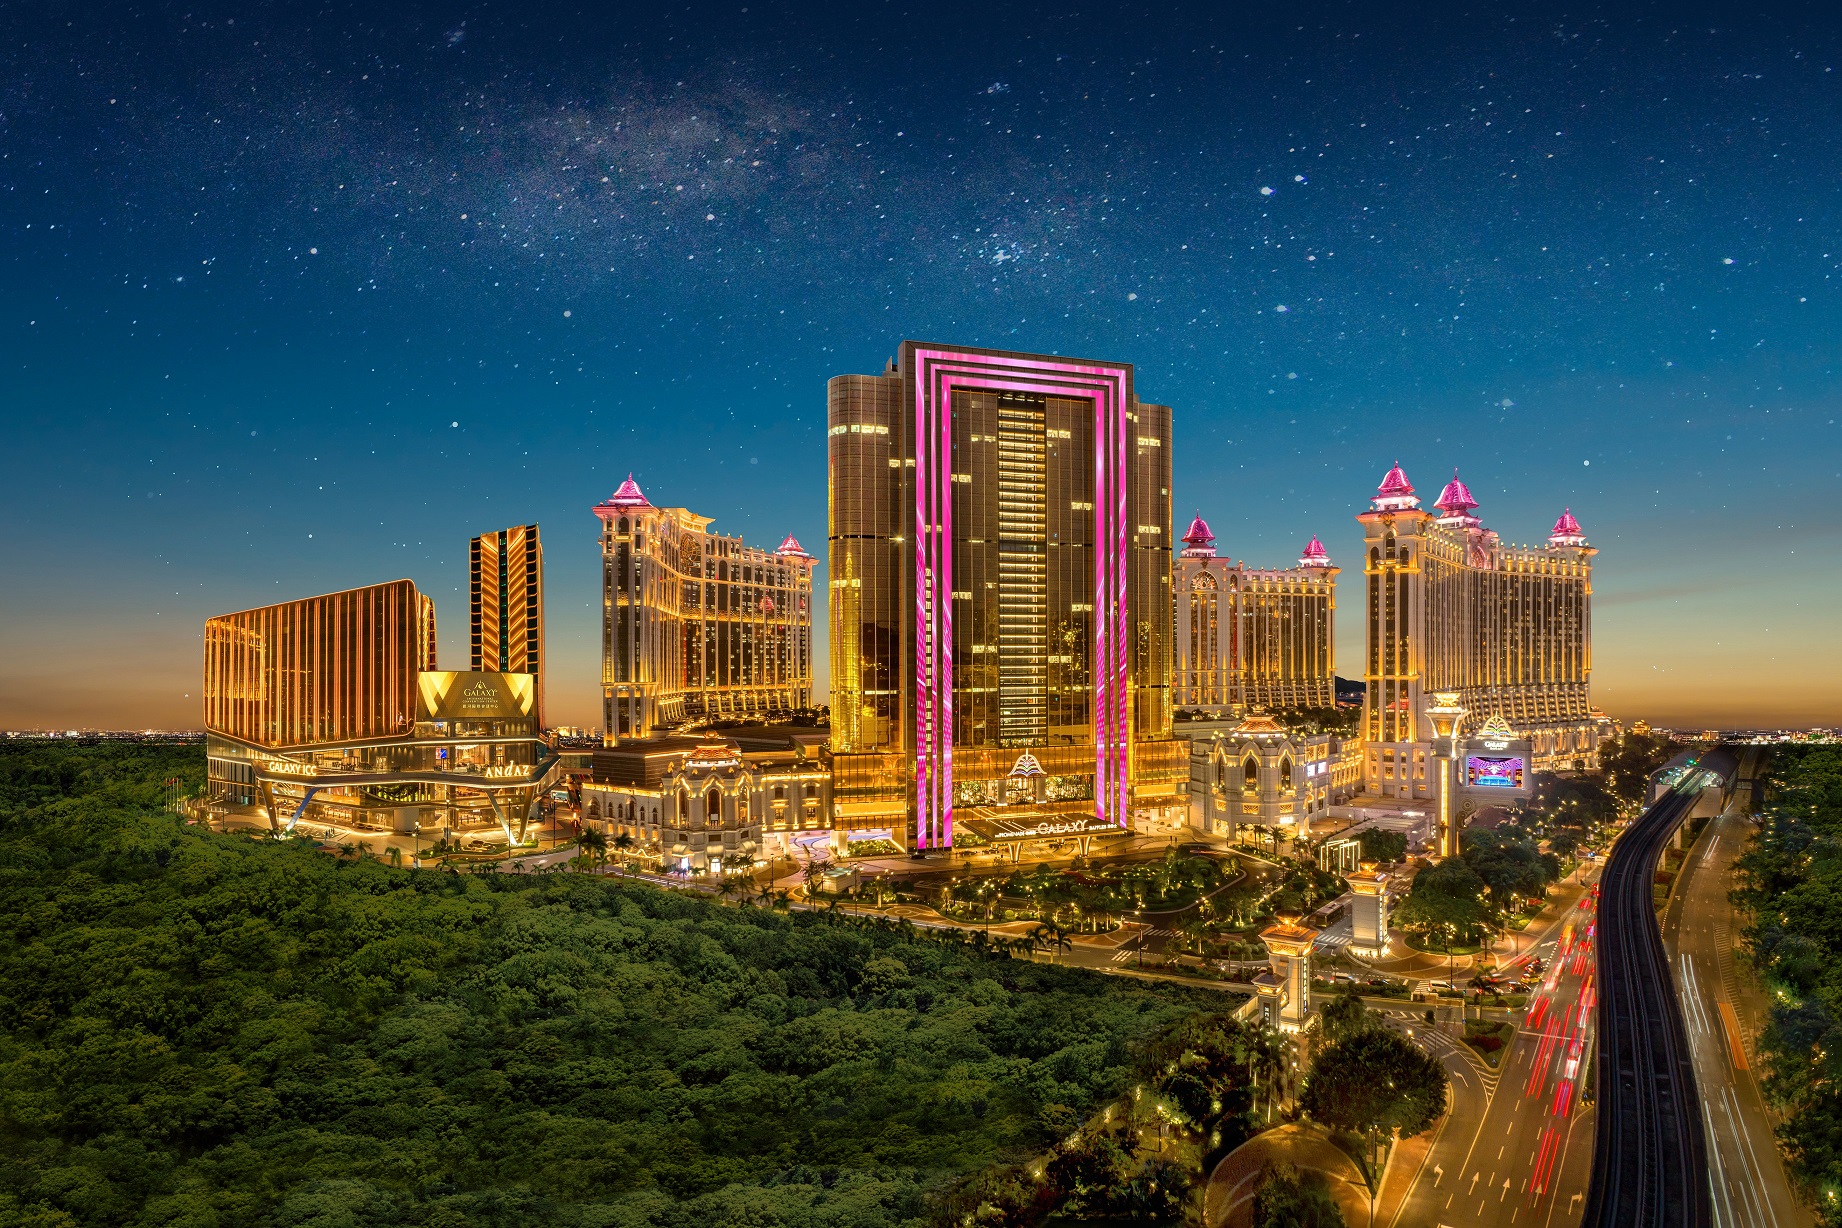 Galaxy Macau™, the world-class luxury integrated resort, covers 1.1 million square meters of unique entertainment and leisure attractions that are unlike anything else in Macau.